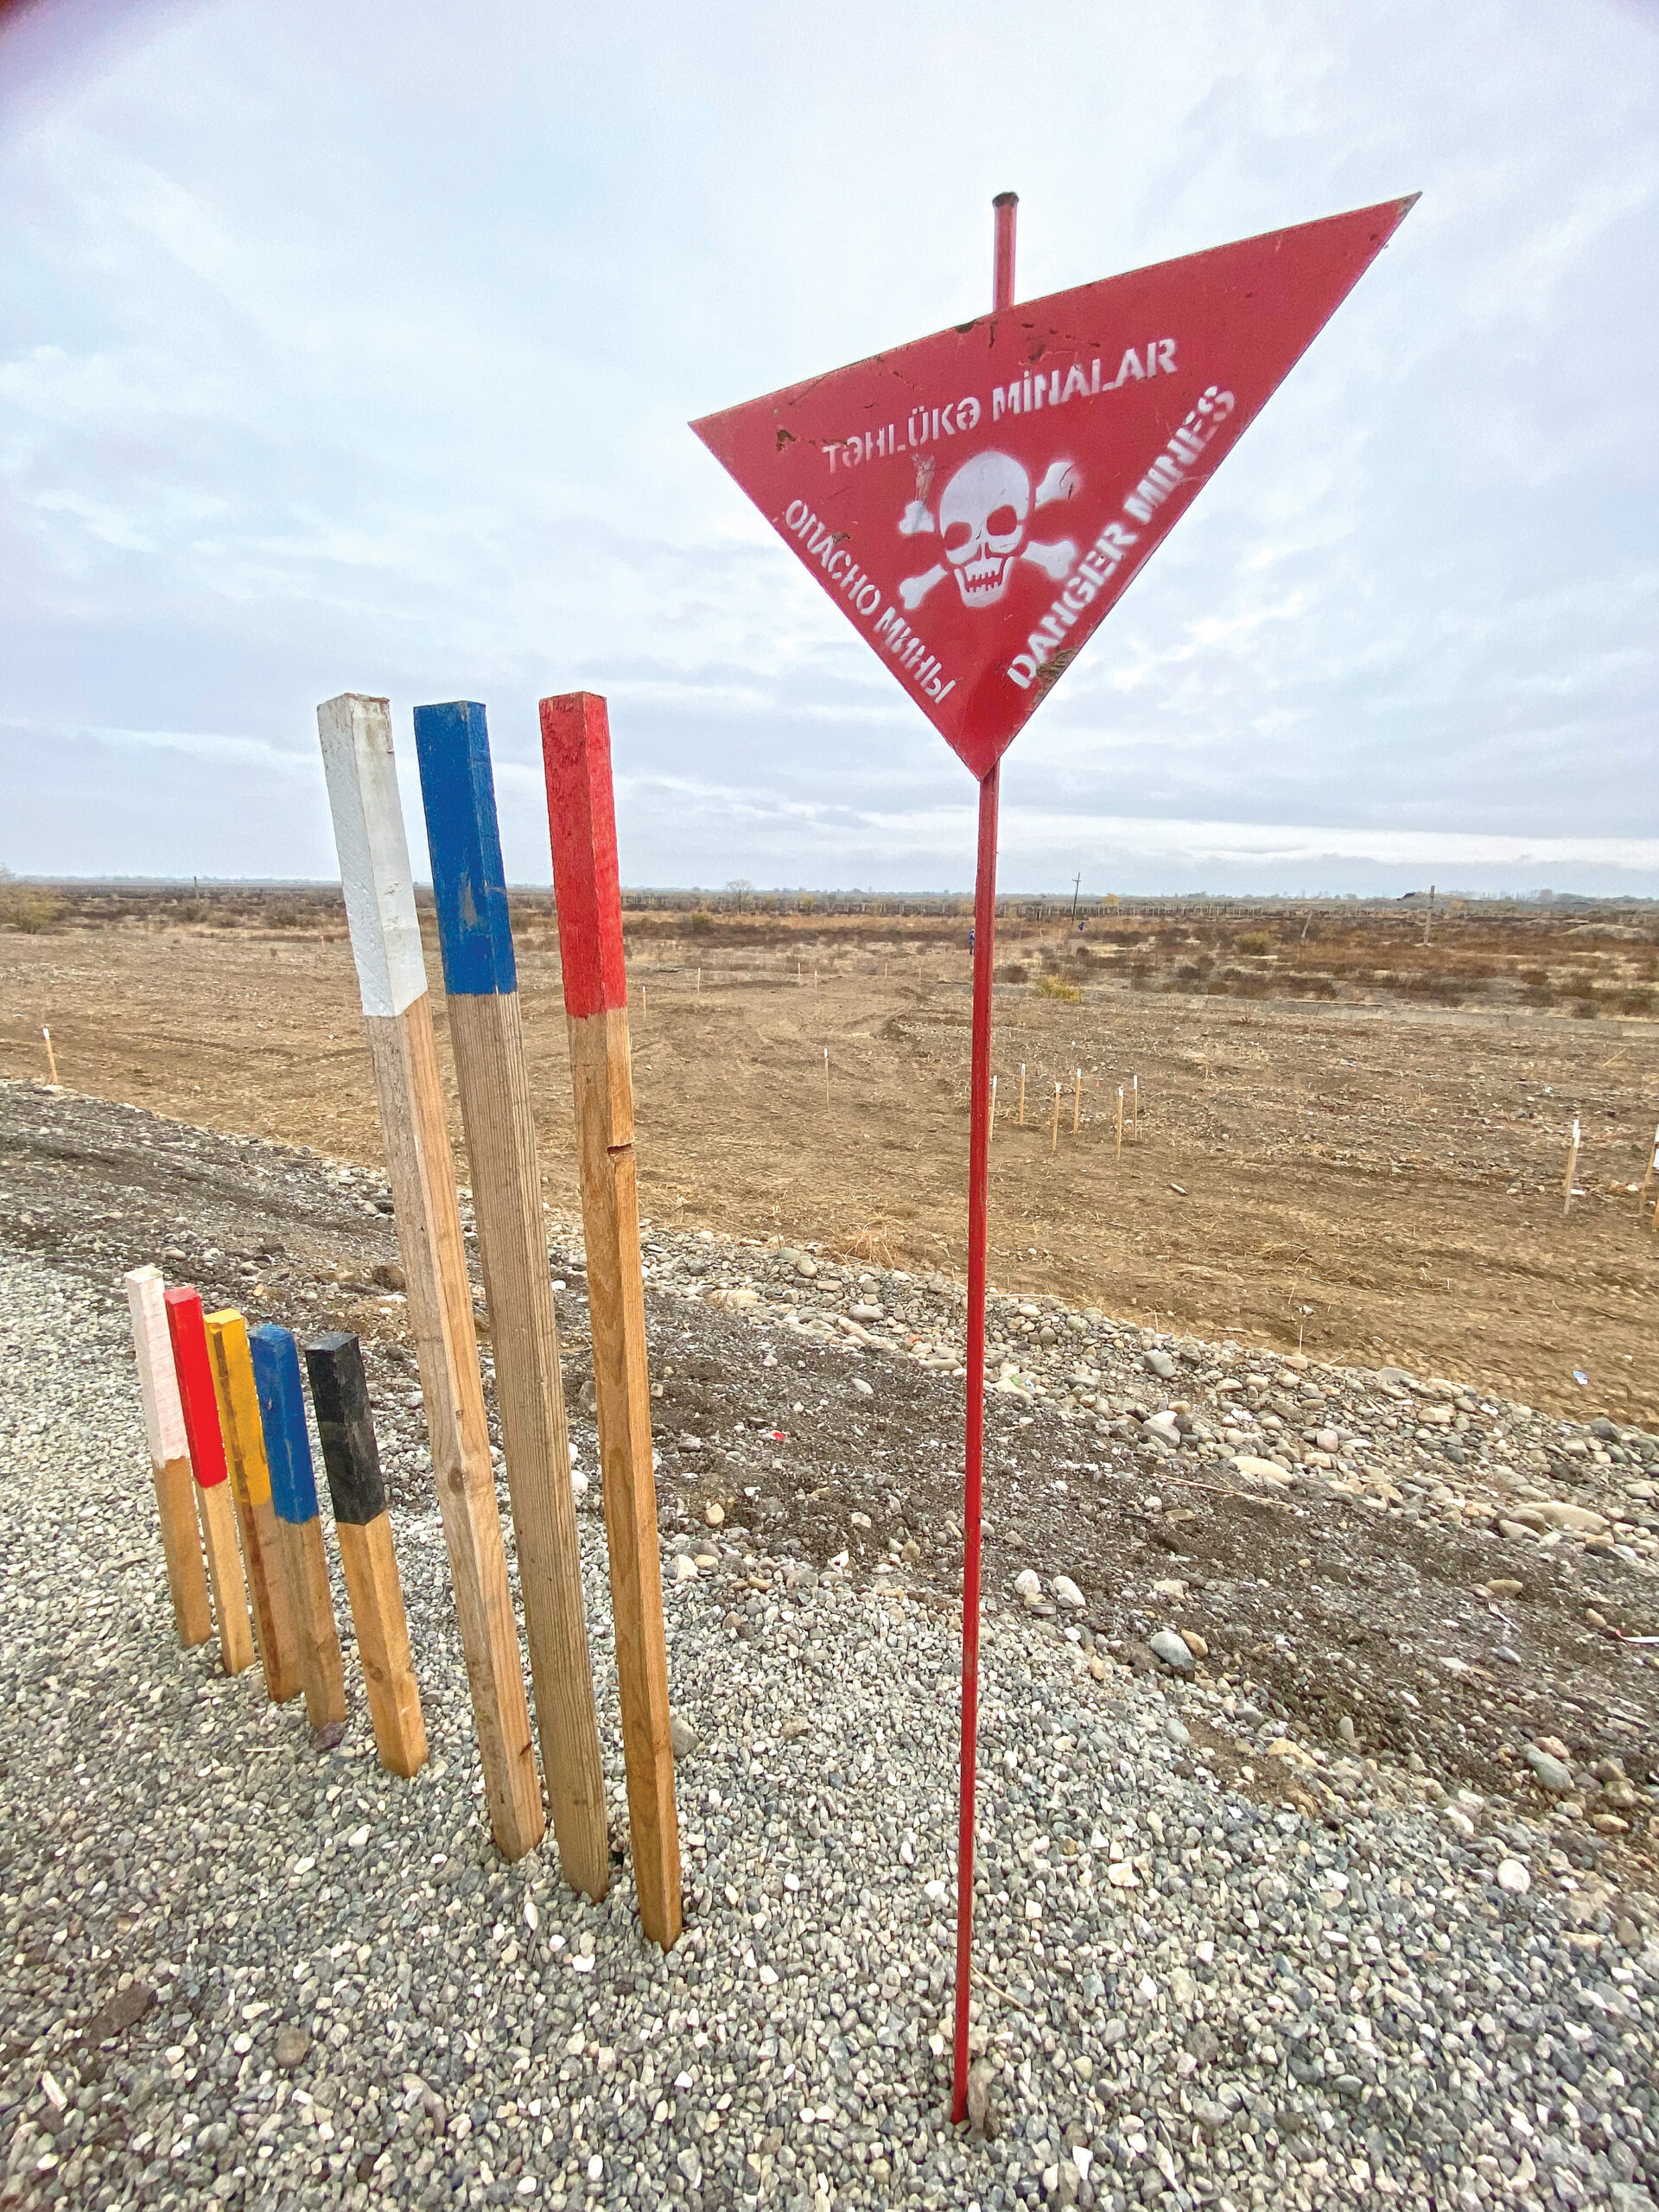 A red triangular sign with a skull and crossbones beside three stakes, one white, one blue, one red